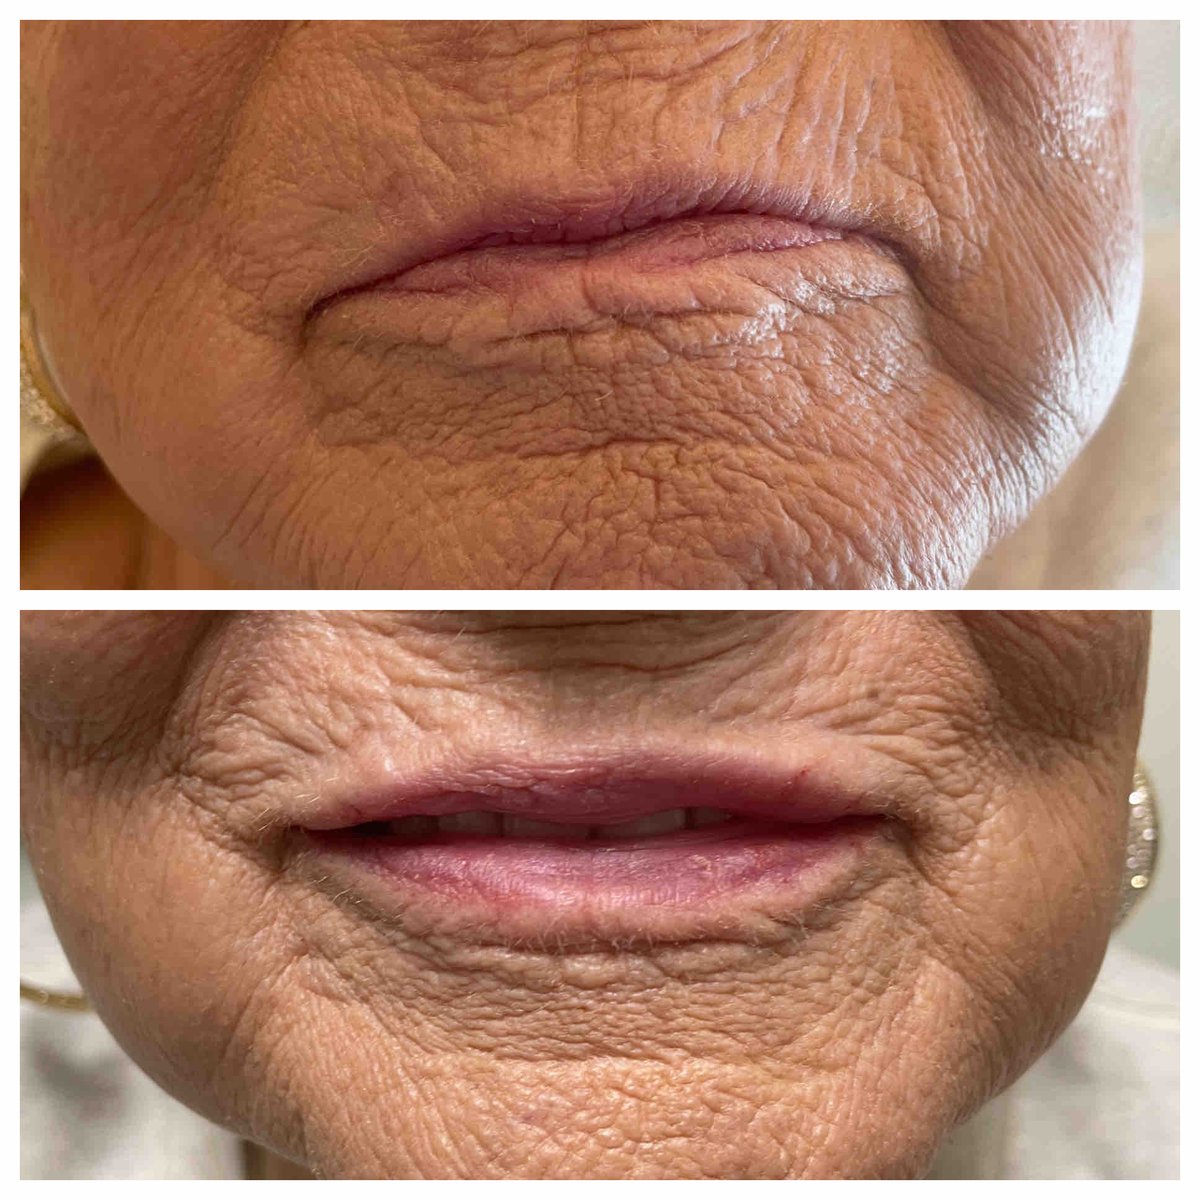 Even ladies in their 80s like to have a little “plump me up.” This is one #syringe of #Restylane #Kysse in the #lips. Results will last her about a year. #drannetrussell #seibellamedspa 501-228-6237 #fillers #antiaging #Galderma #Aspire #LittleRock❤️💋💄